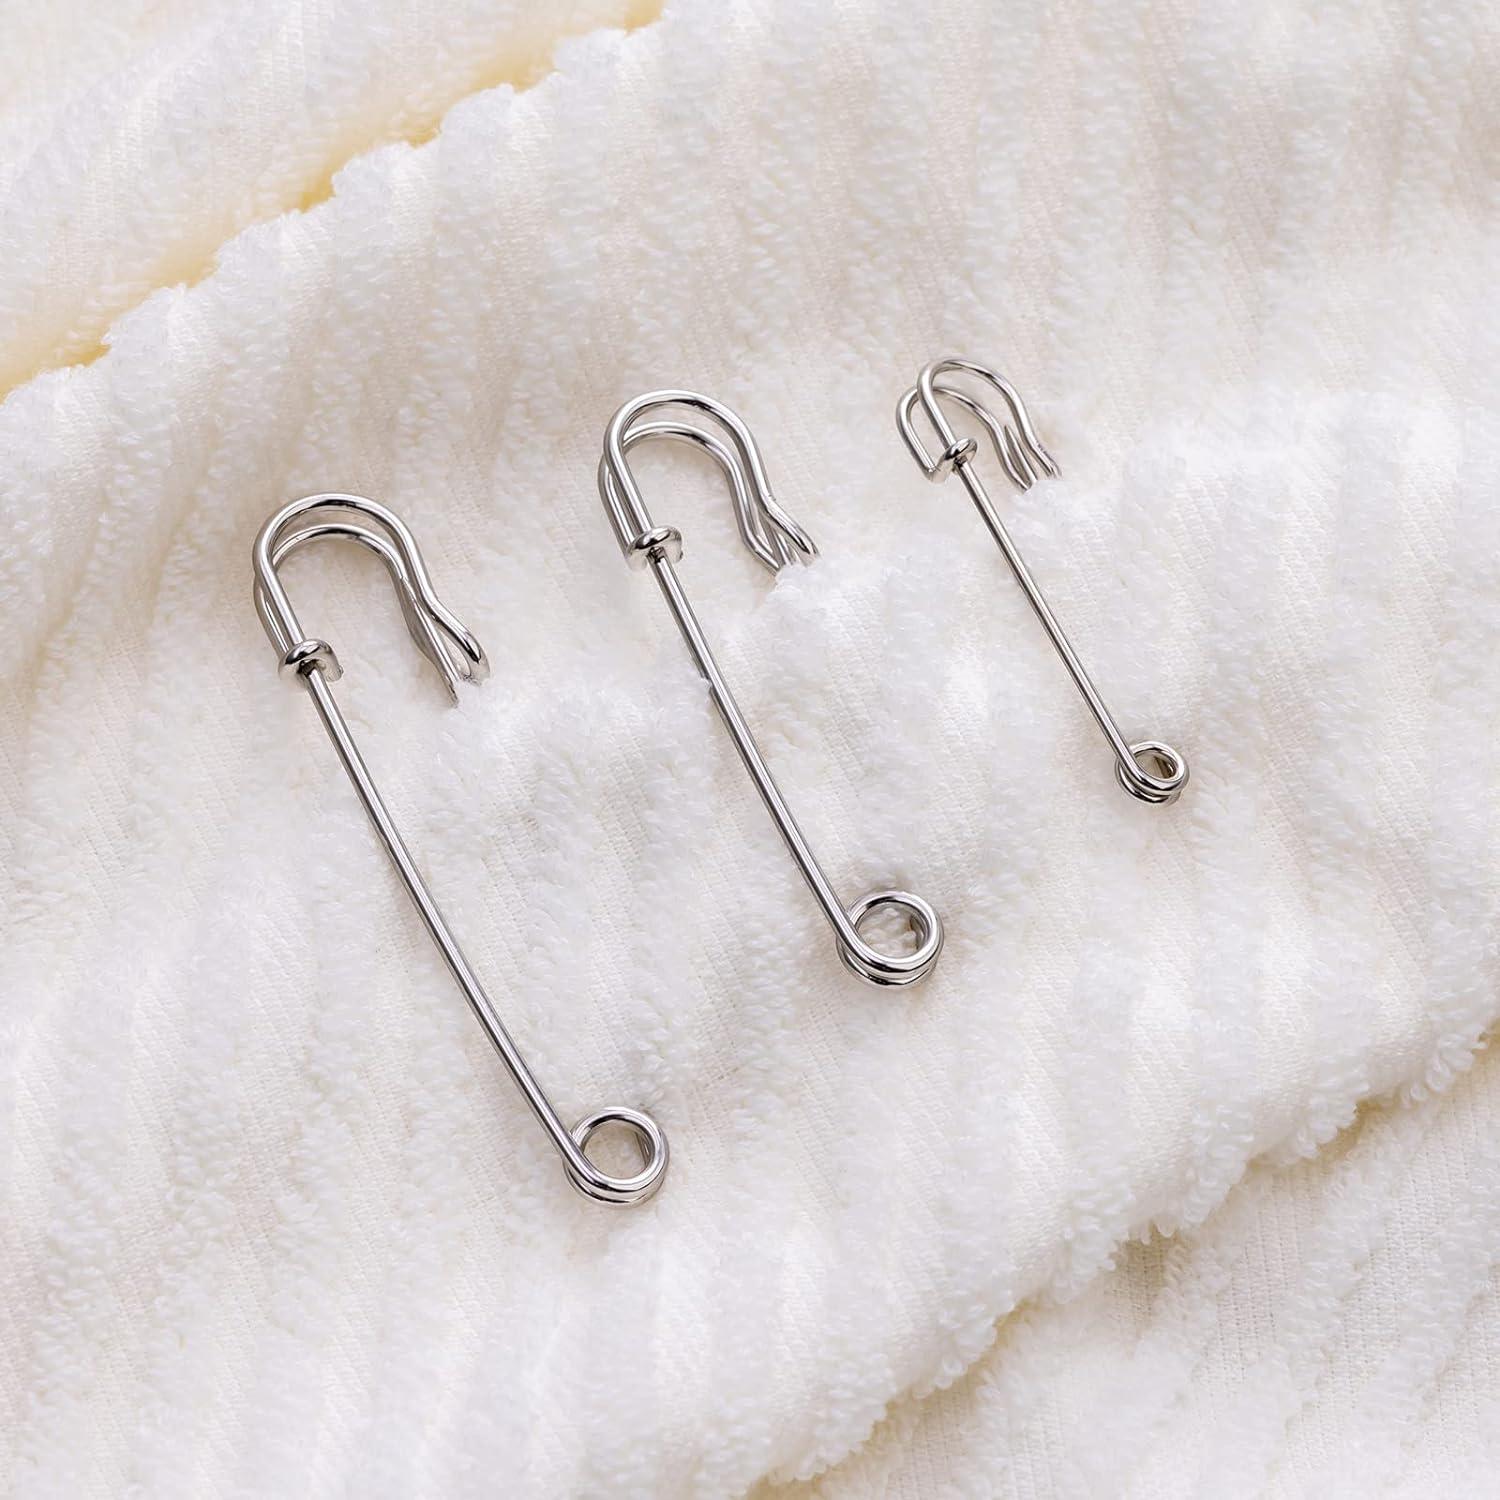 Large Safety Pins Pack of 40 Safety Pins Heavy Duty Assorted (2